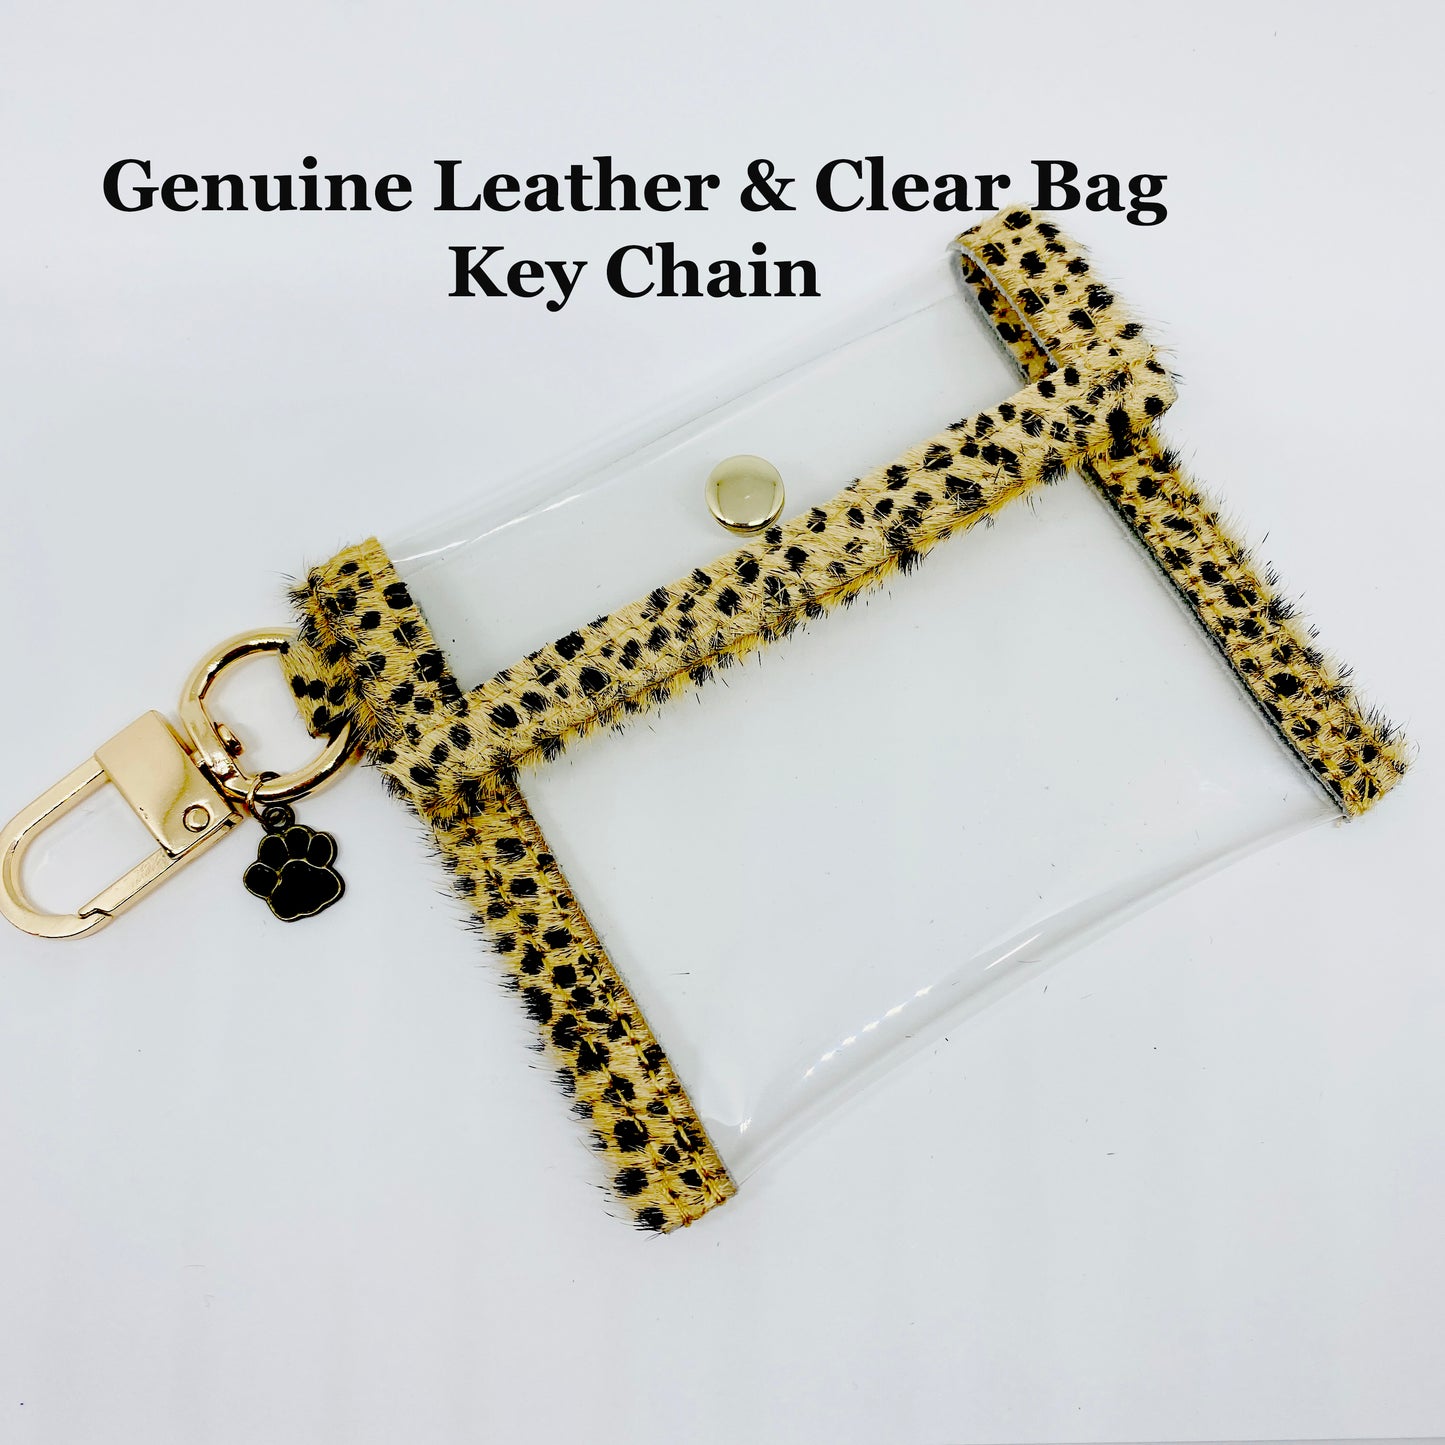 Animal Pattern Print Genuine Leather & Clear Pouch Key Chain, Clear Business Card, ID Card Holder Key Ring, Clear Vinyl Wallet